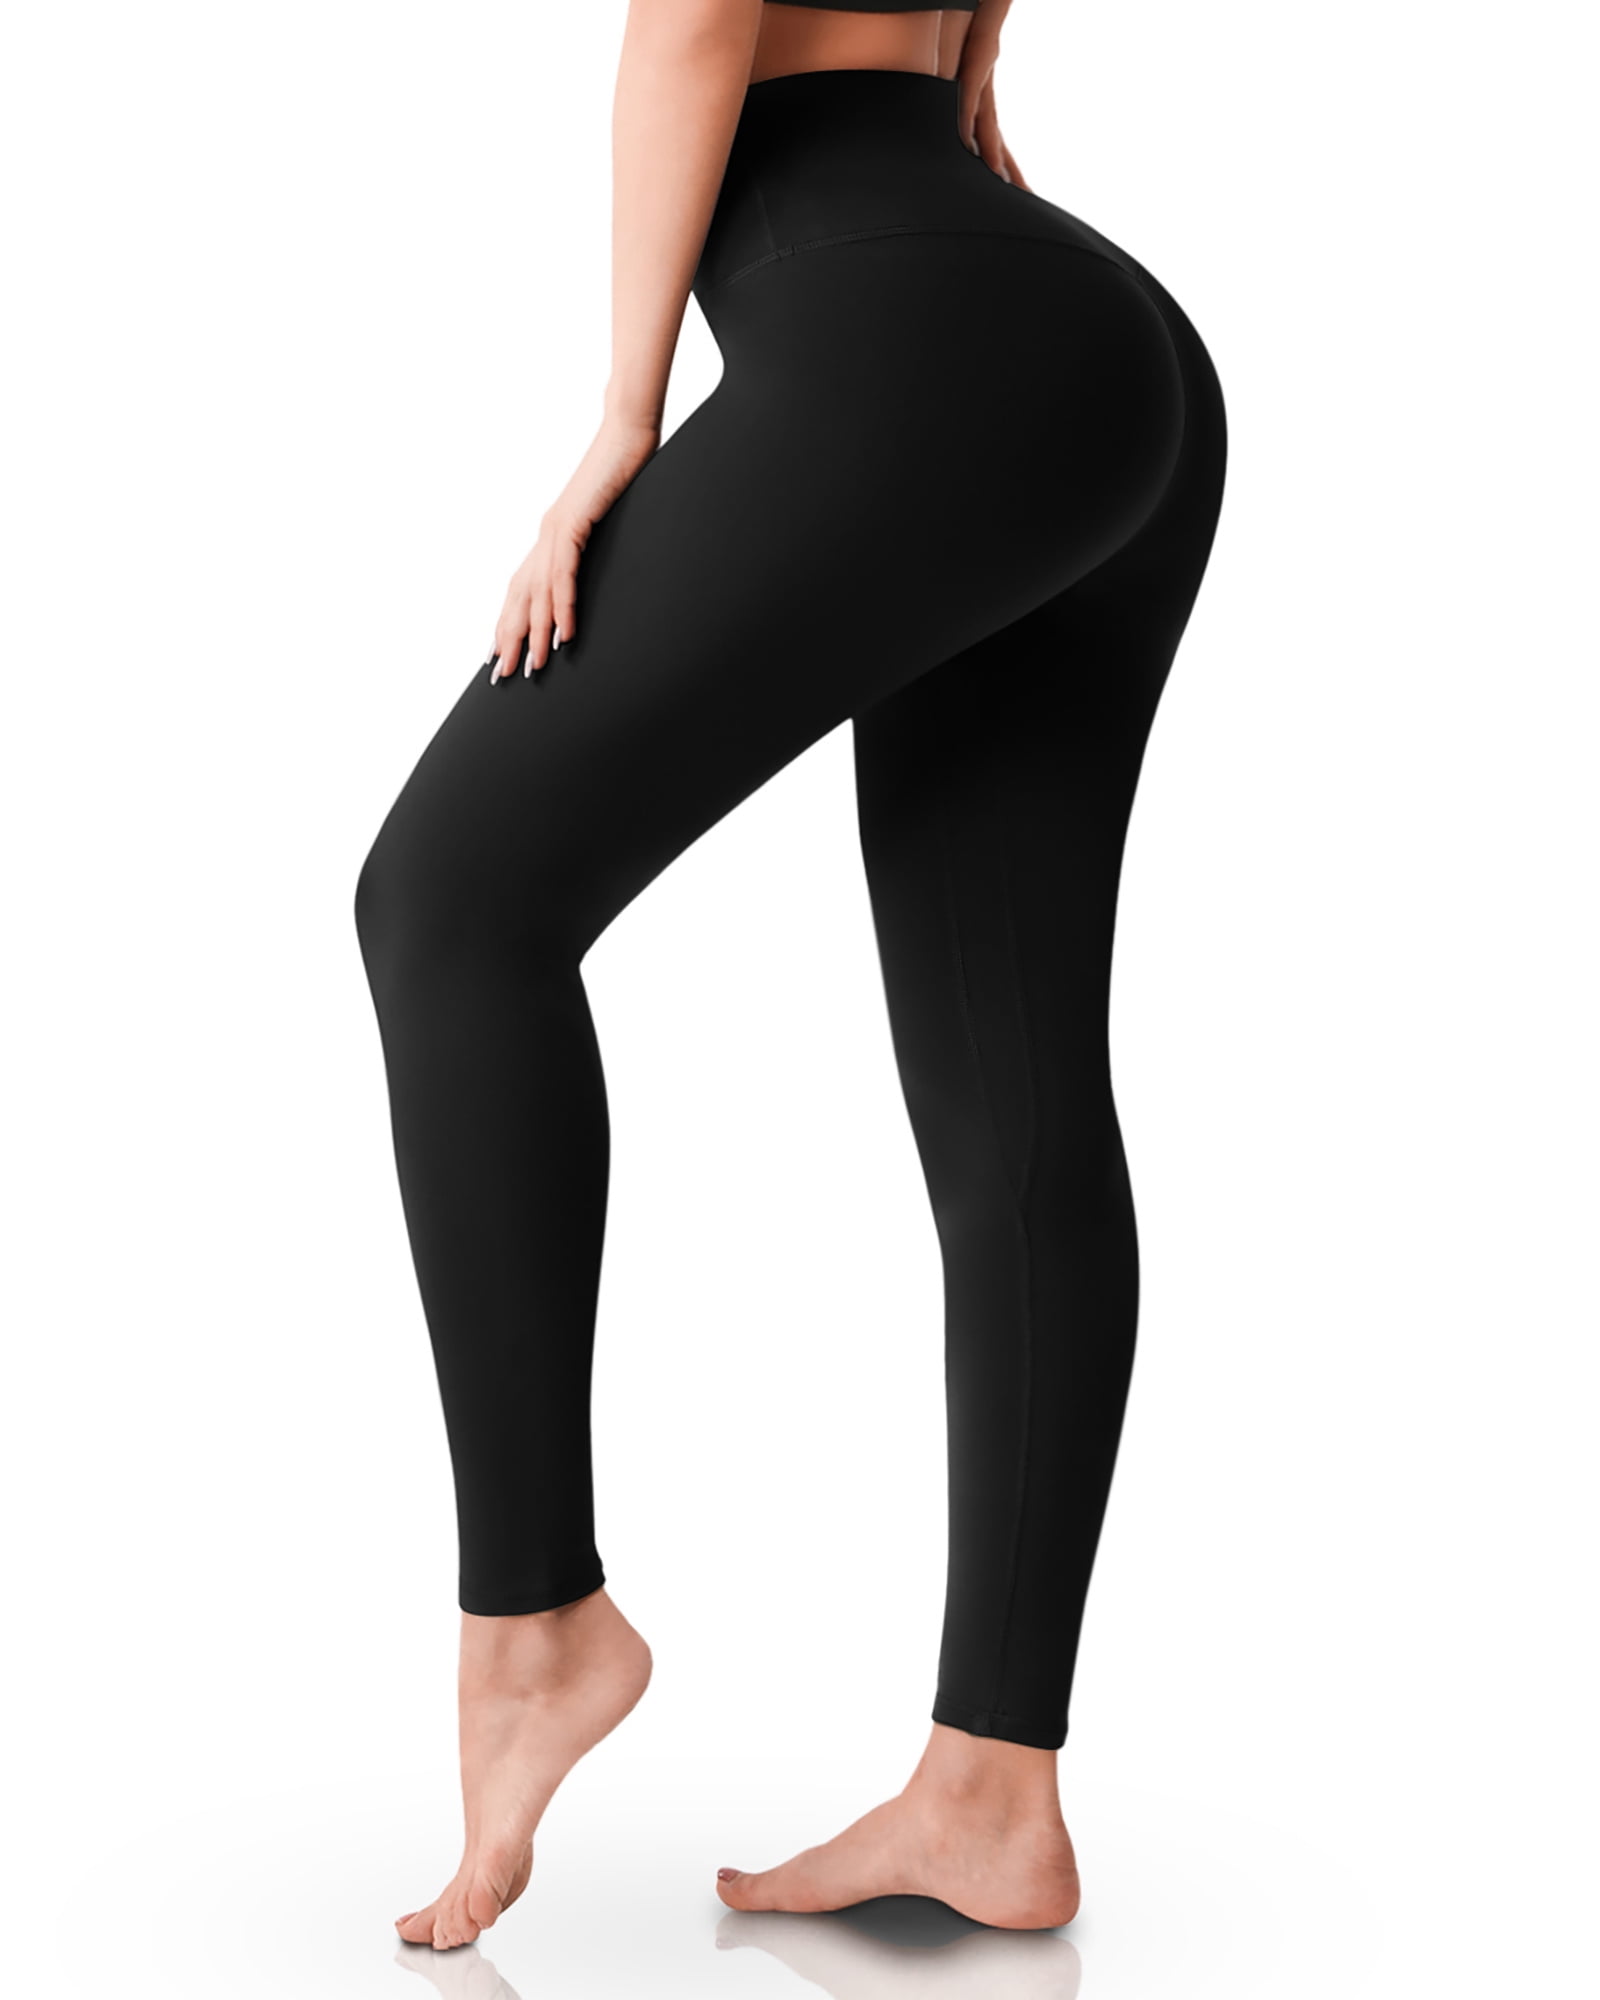 LUOYANXI High Waist Tummy Control Leggings for Women Winter Seamless Soft Thick Fleece Lined Terry Pants 